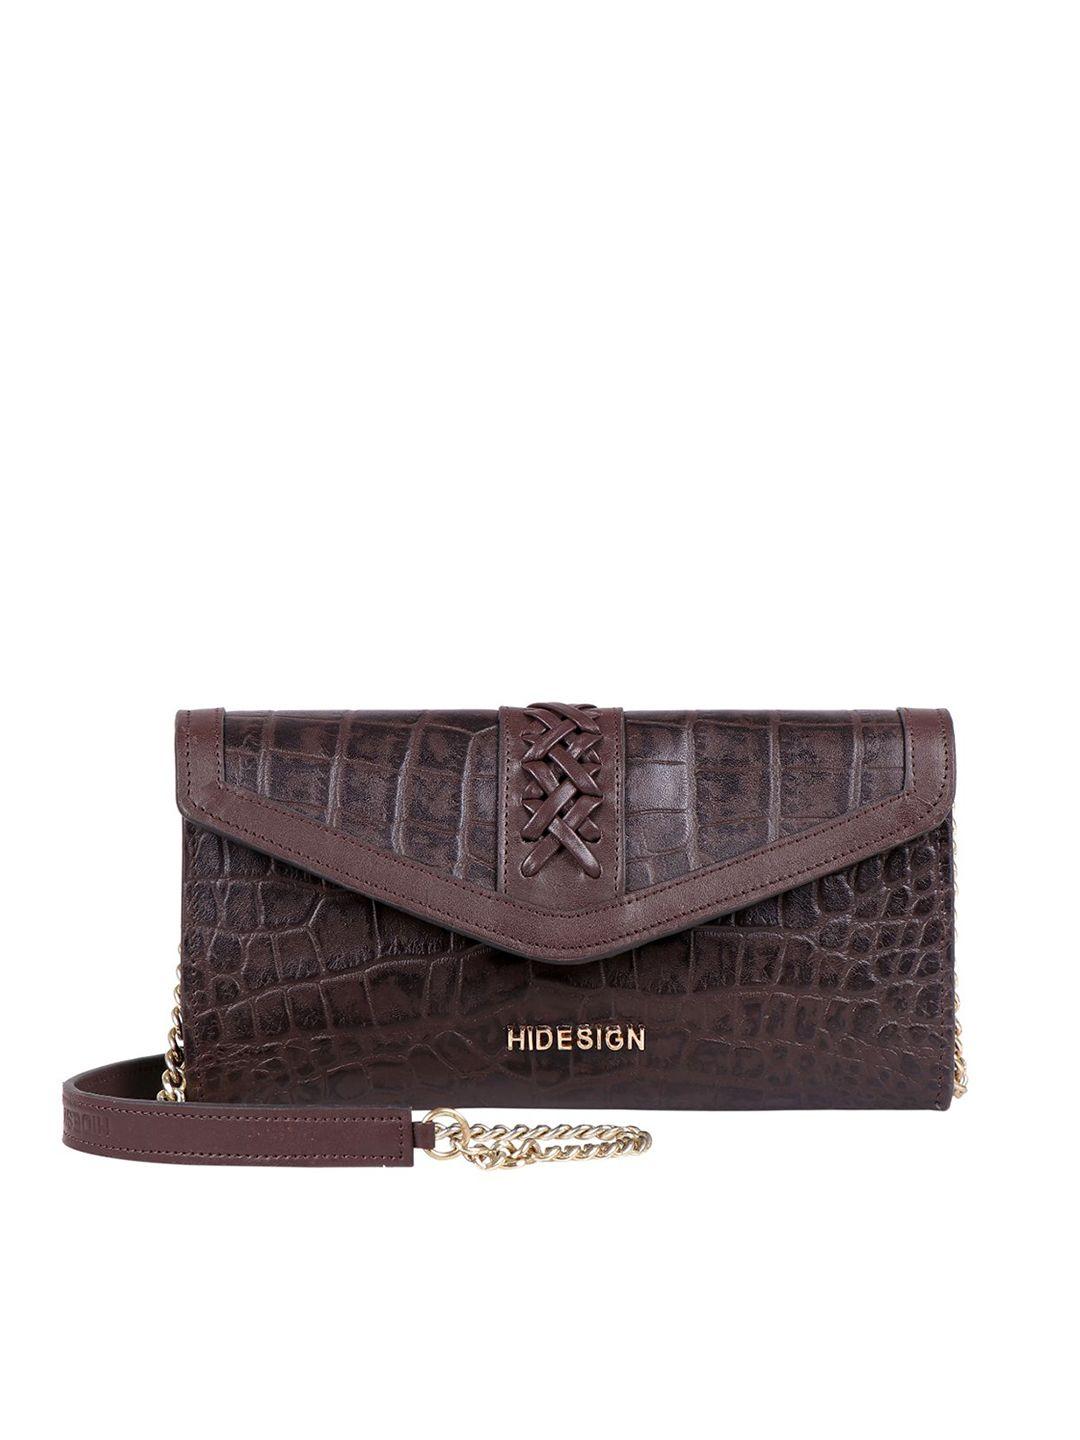 hidesign women brown textured leather envelope with sling strap